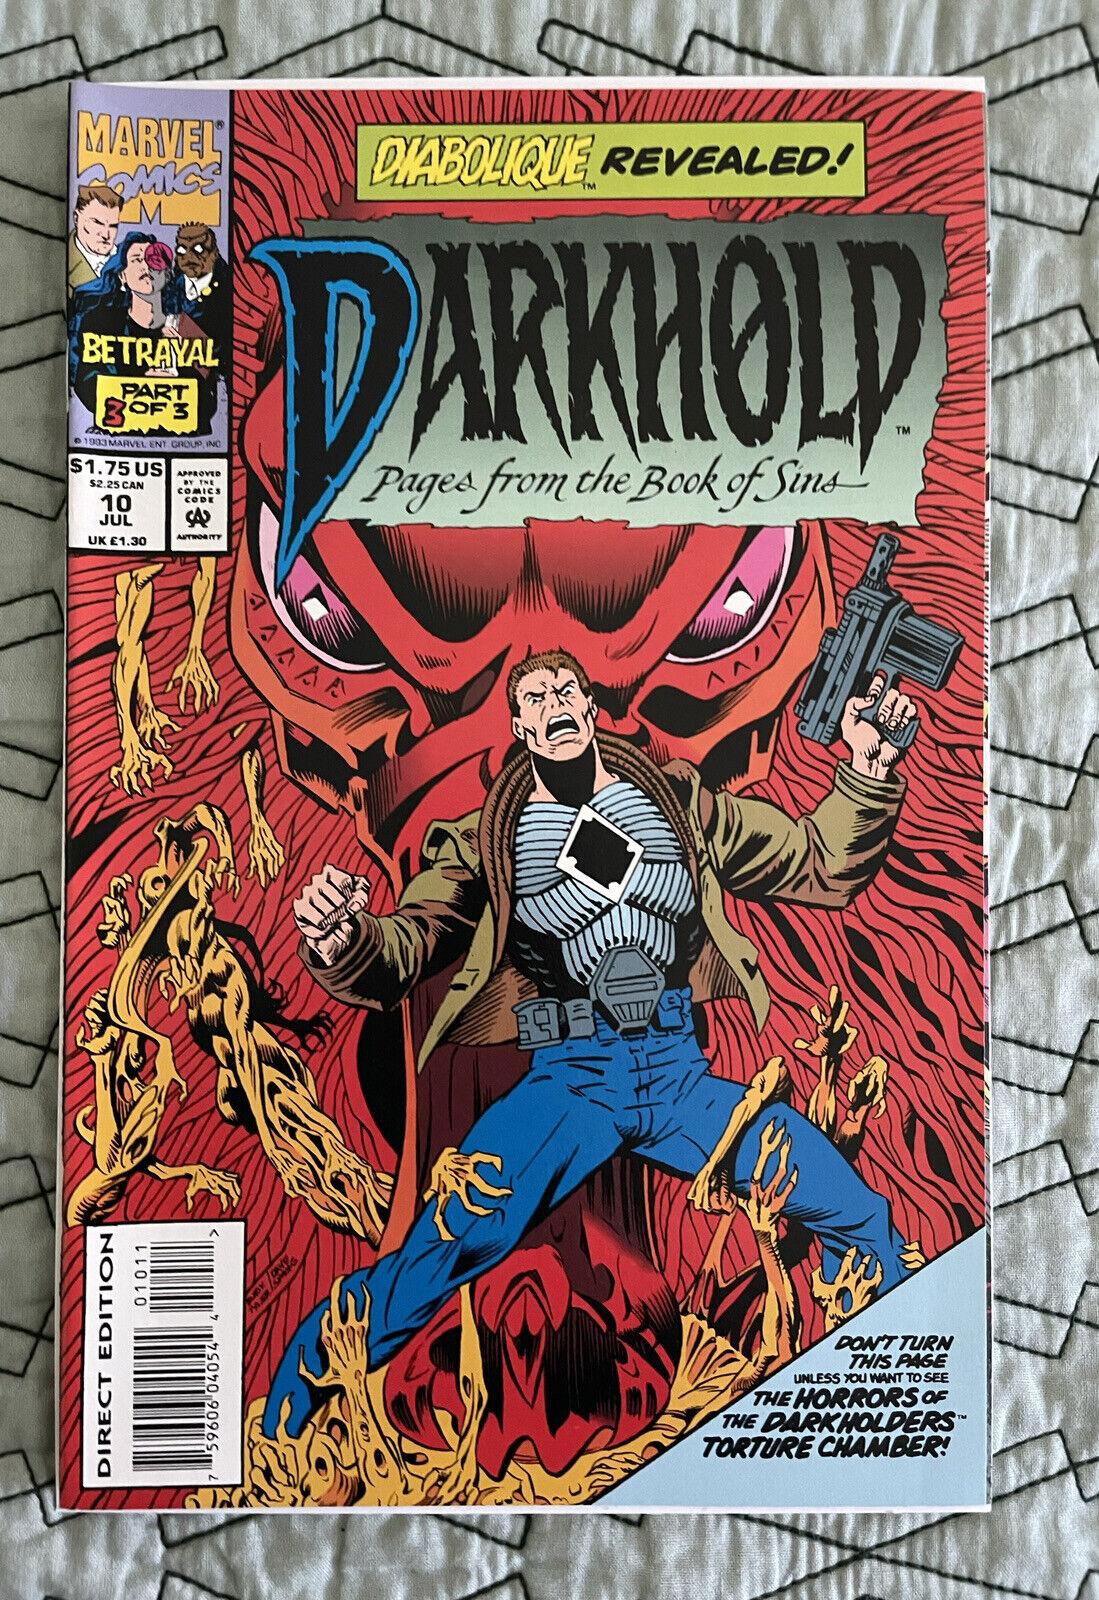 Marvel Comics Darkhold: Pages from the Book of Sins #10 1993 (NM 9.4)Rurik Tyler